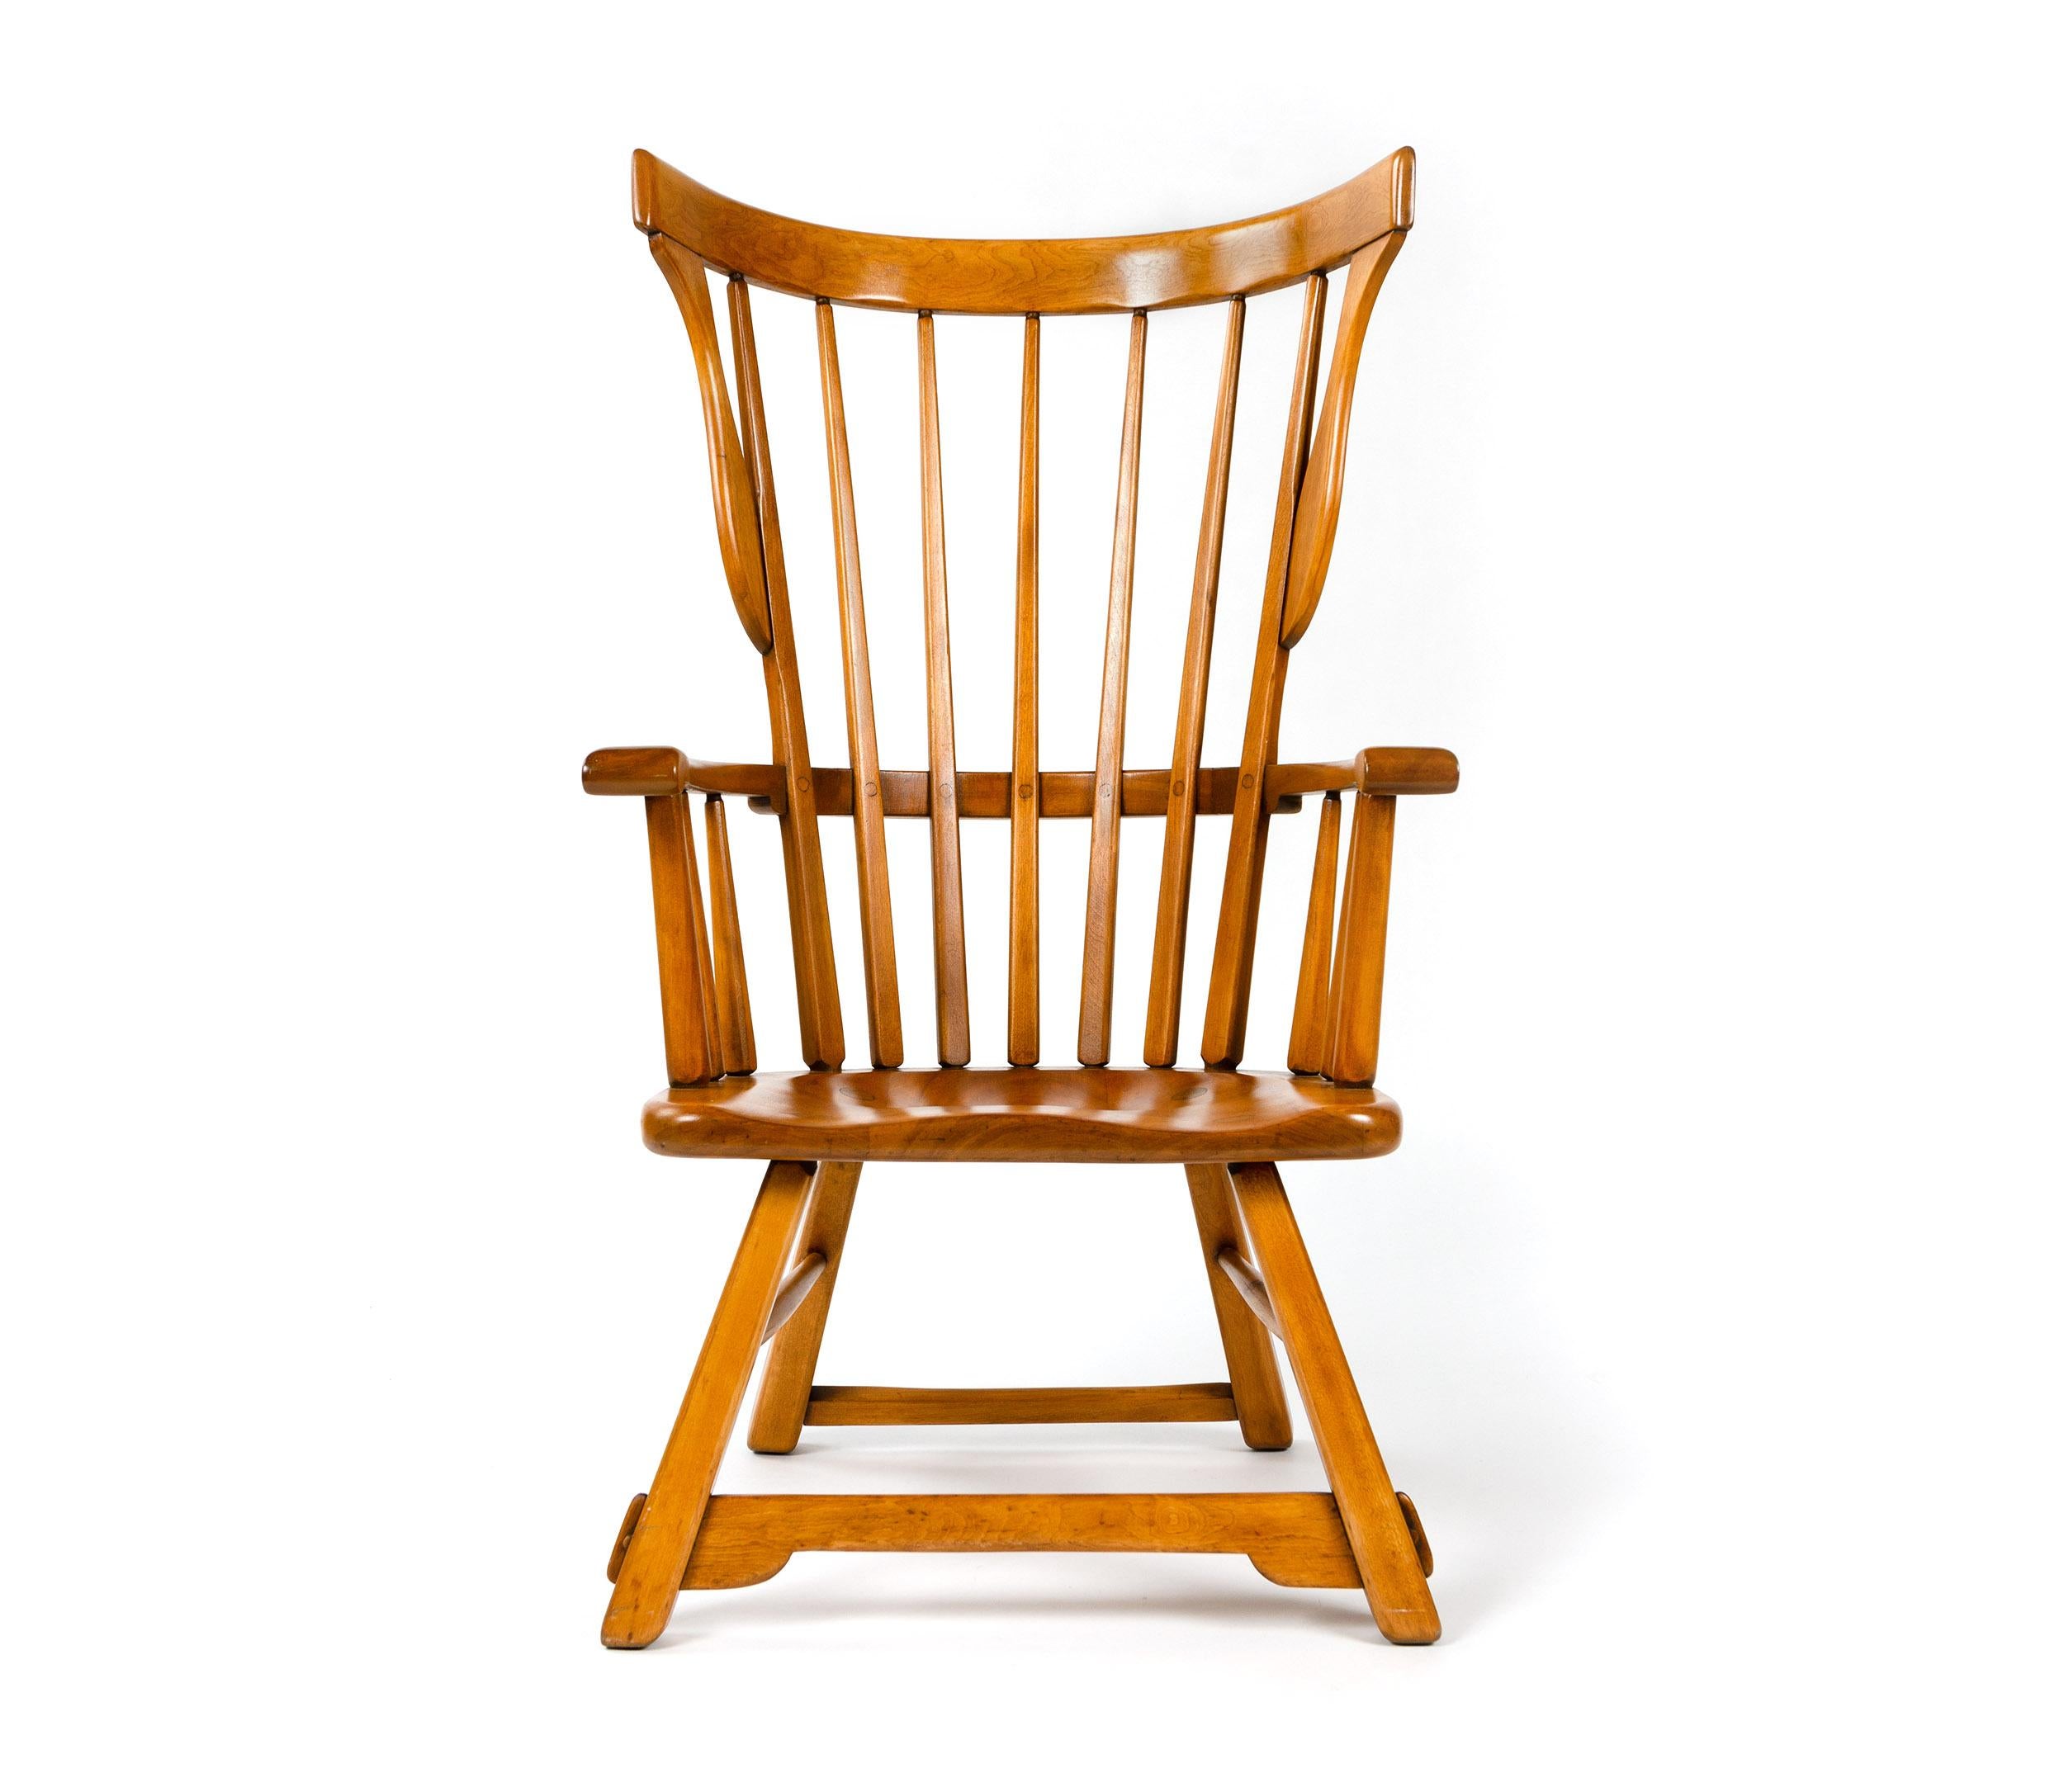 A Craftsman wingback armchair by Herman DeVries in solid maplewood; hand-hewn spindles, shaped seat on splayed squared legs. Crafted in the 1930s.